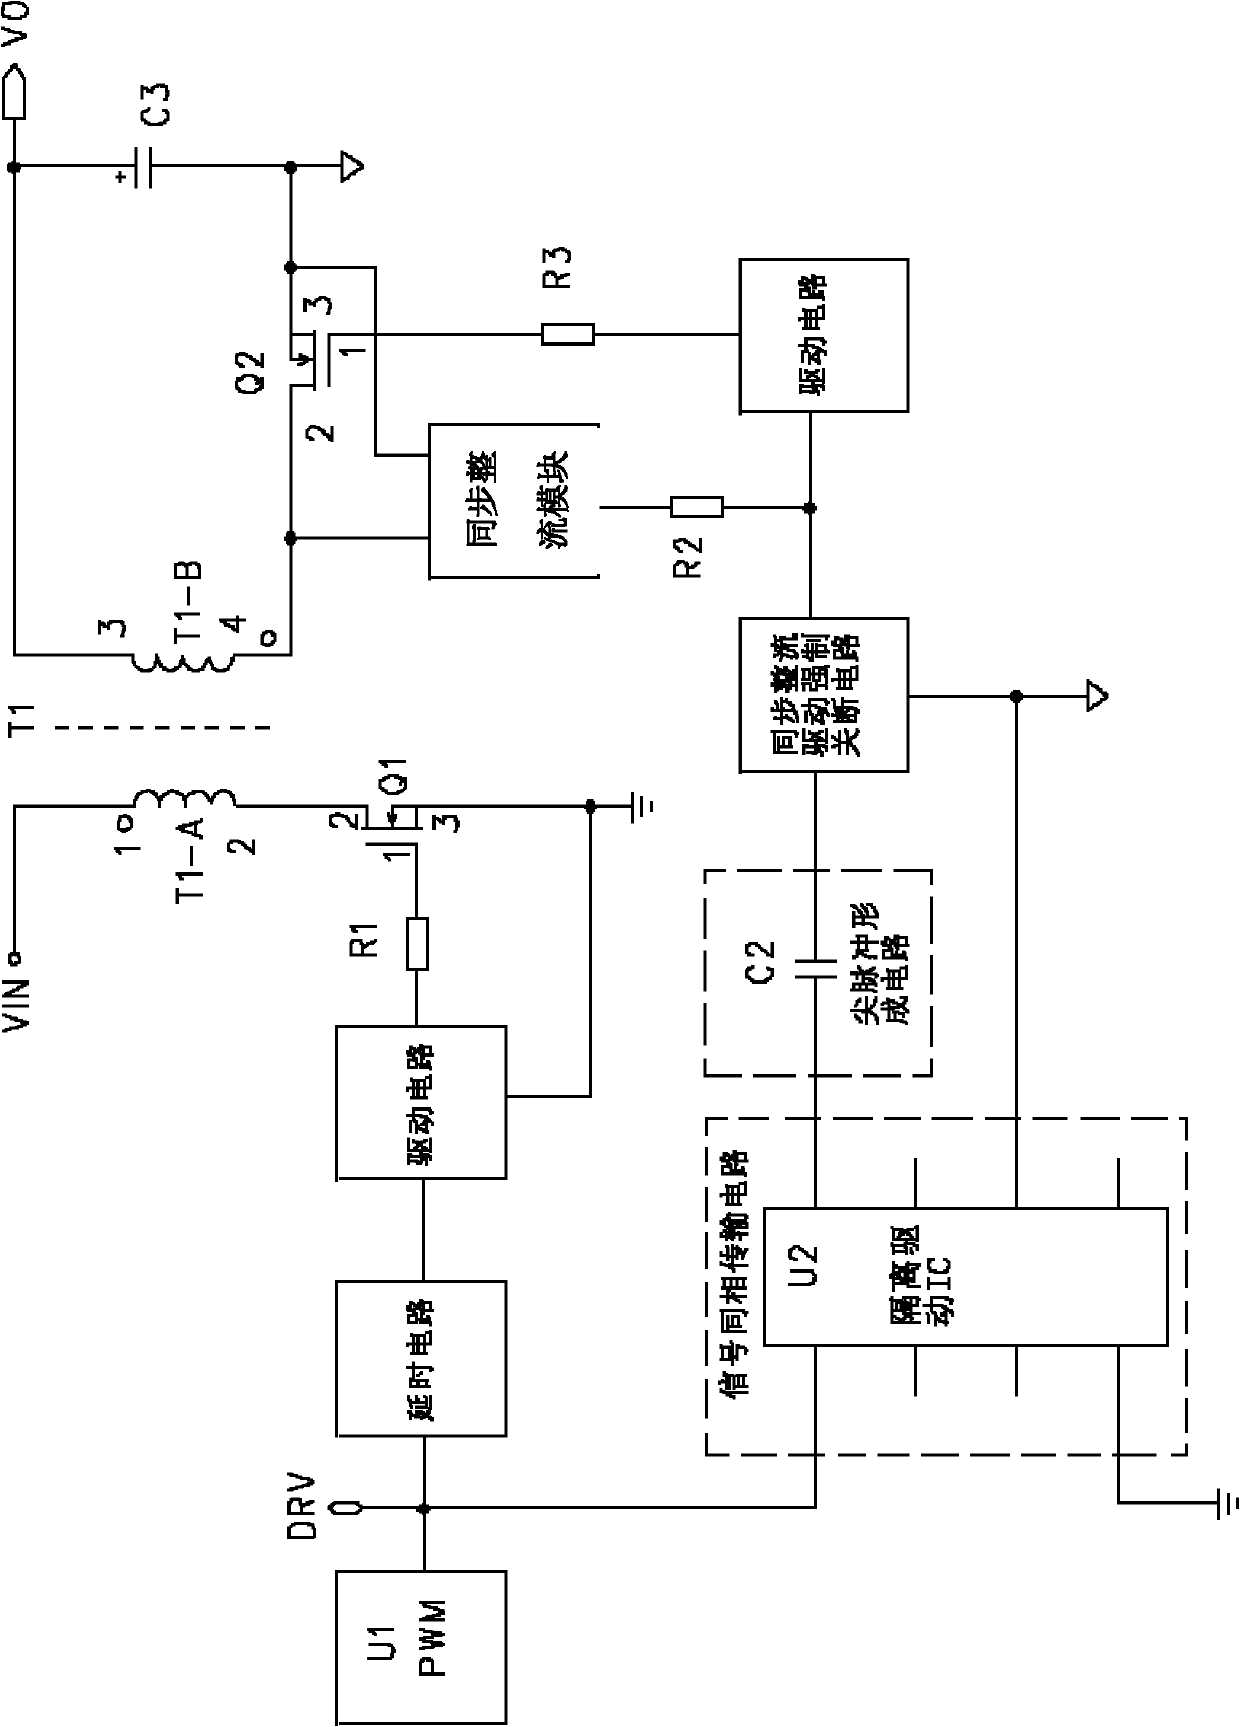 Flyback synchronous rectification control circuit